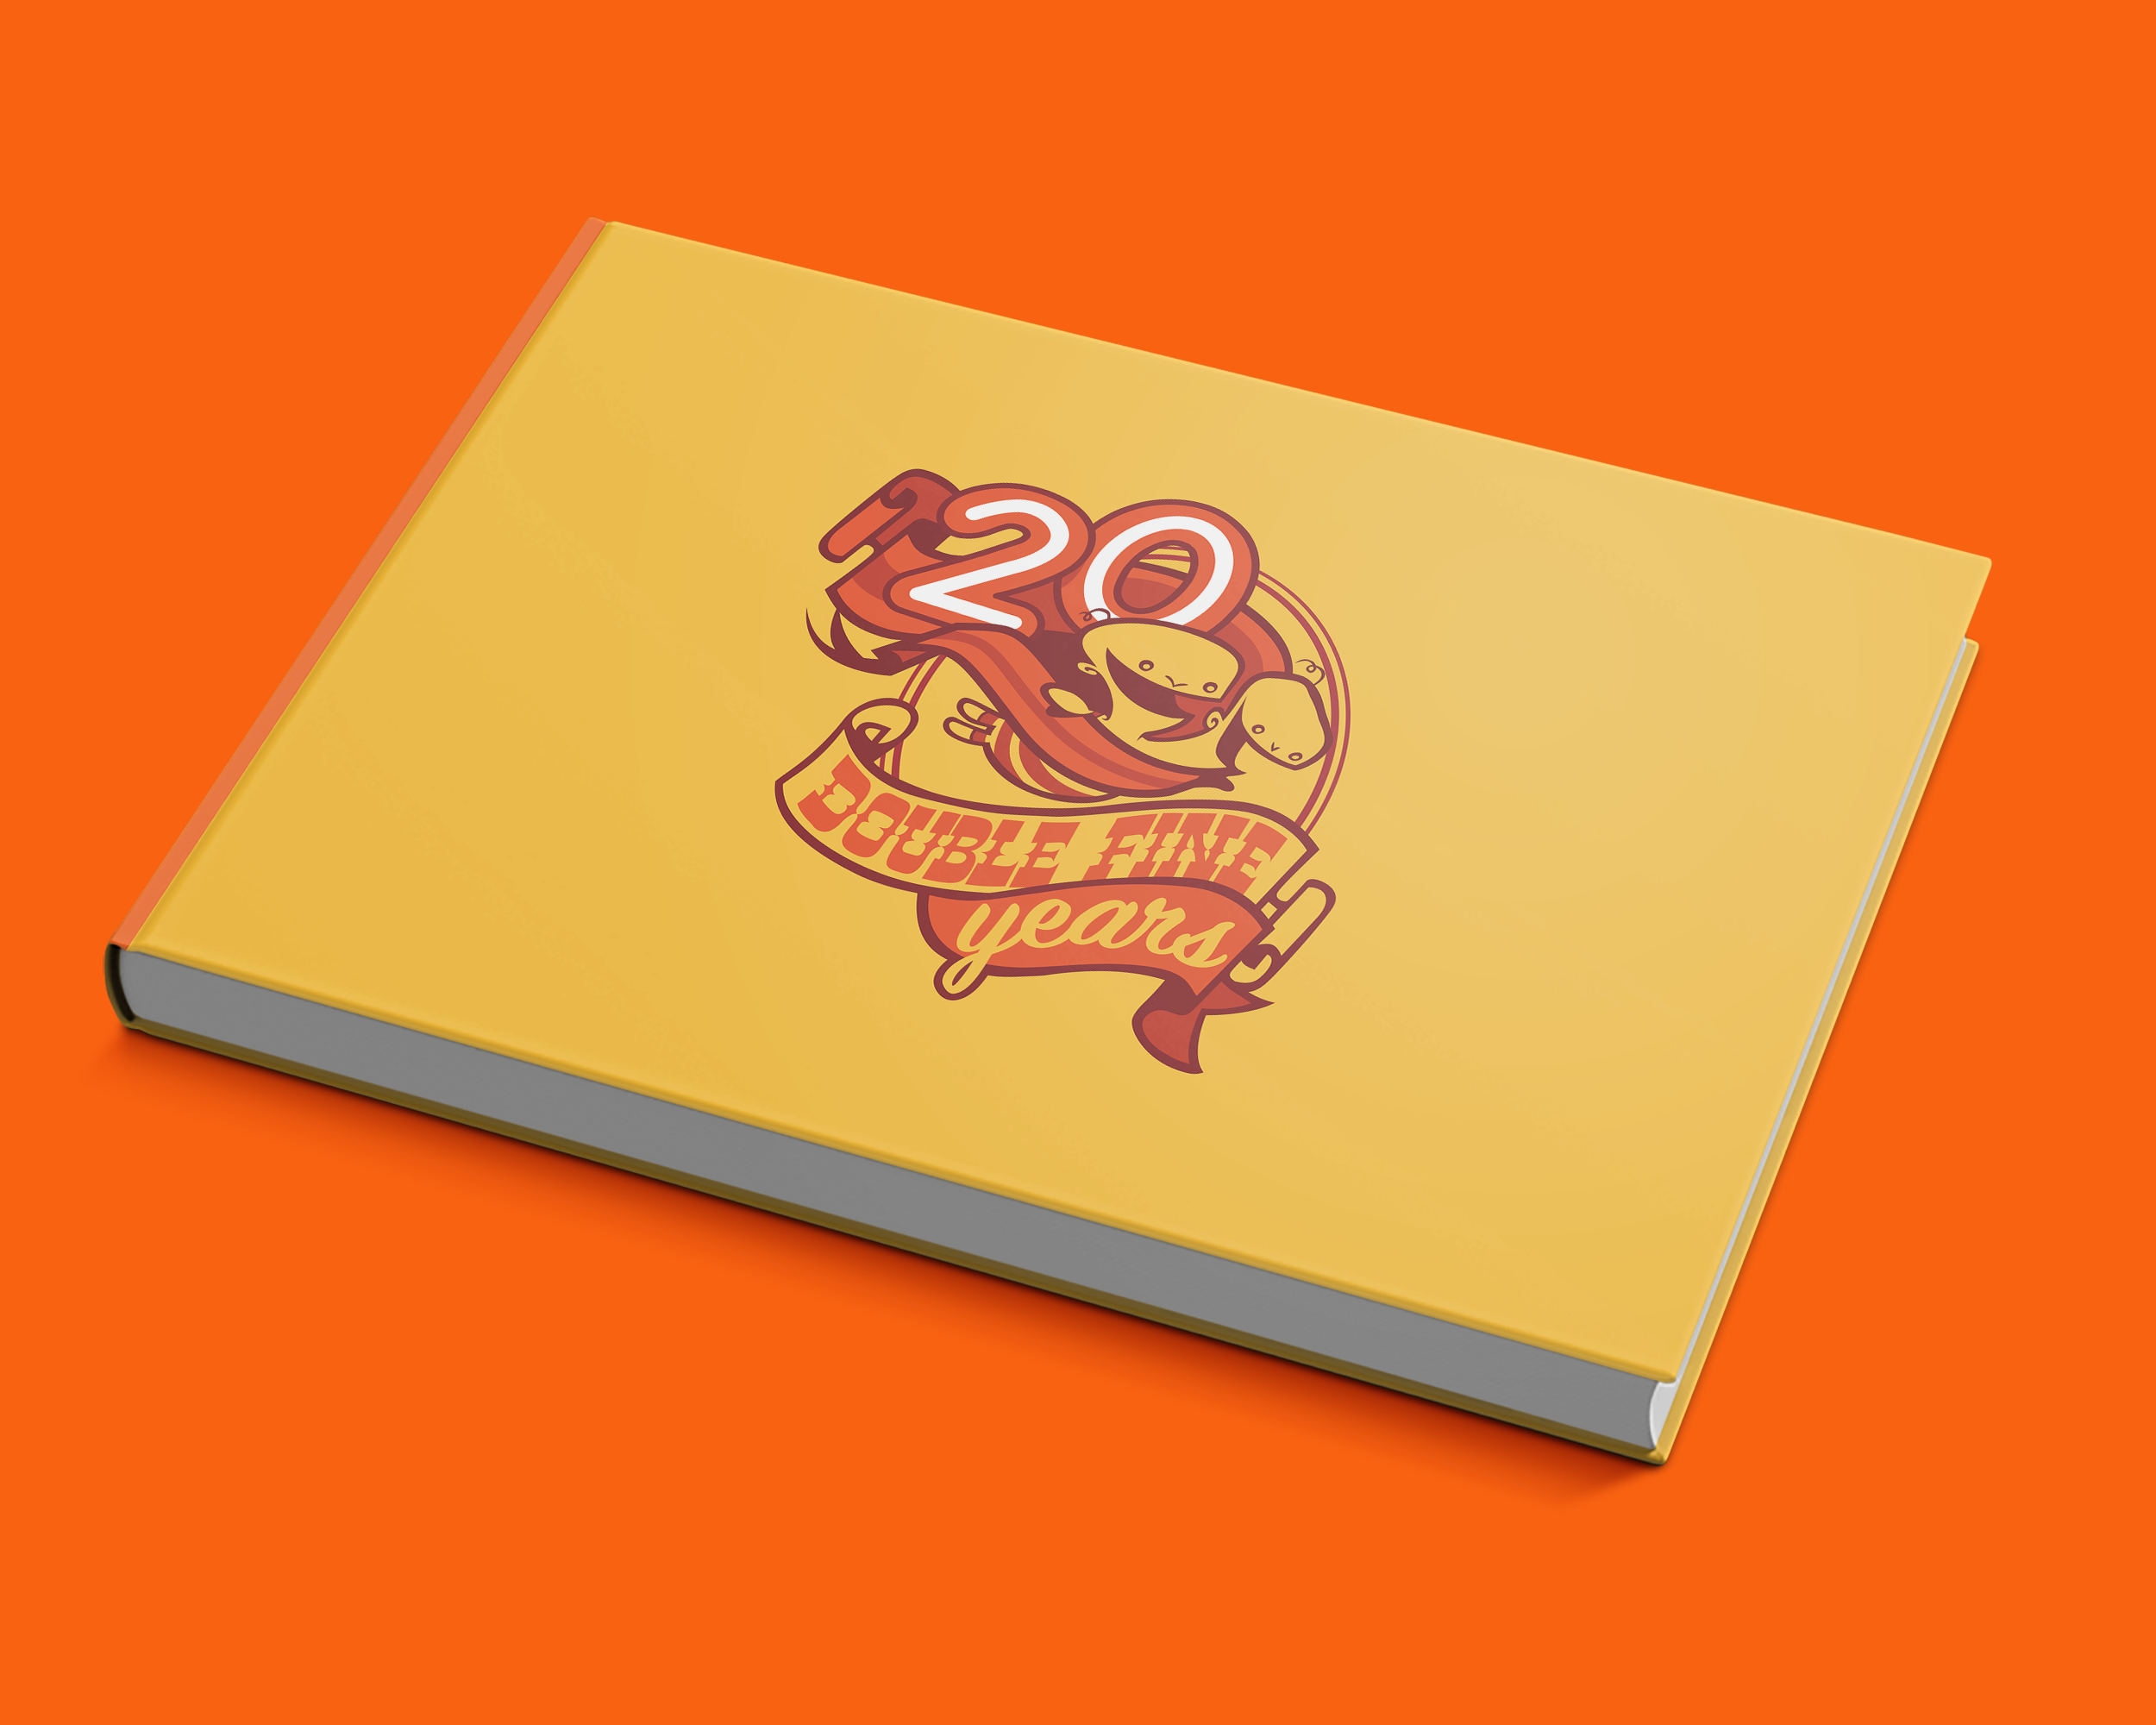 20 Double Fine Years: Standard Edition